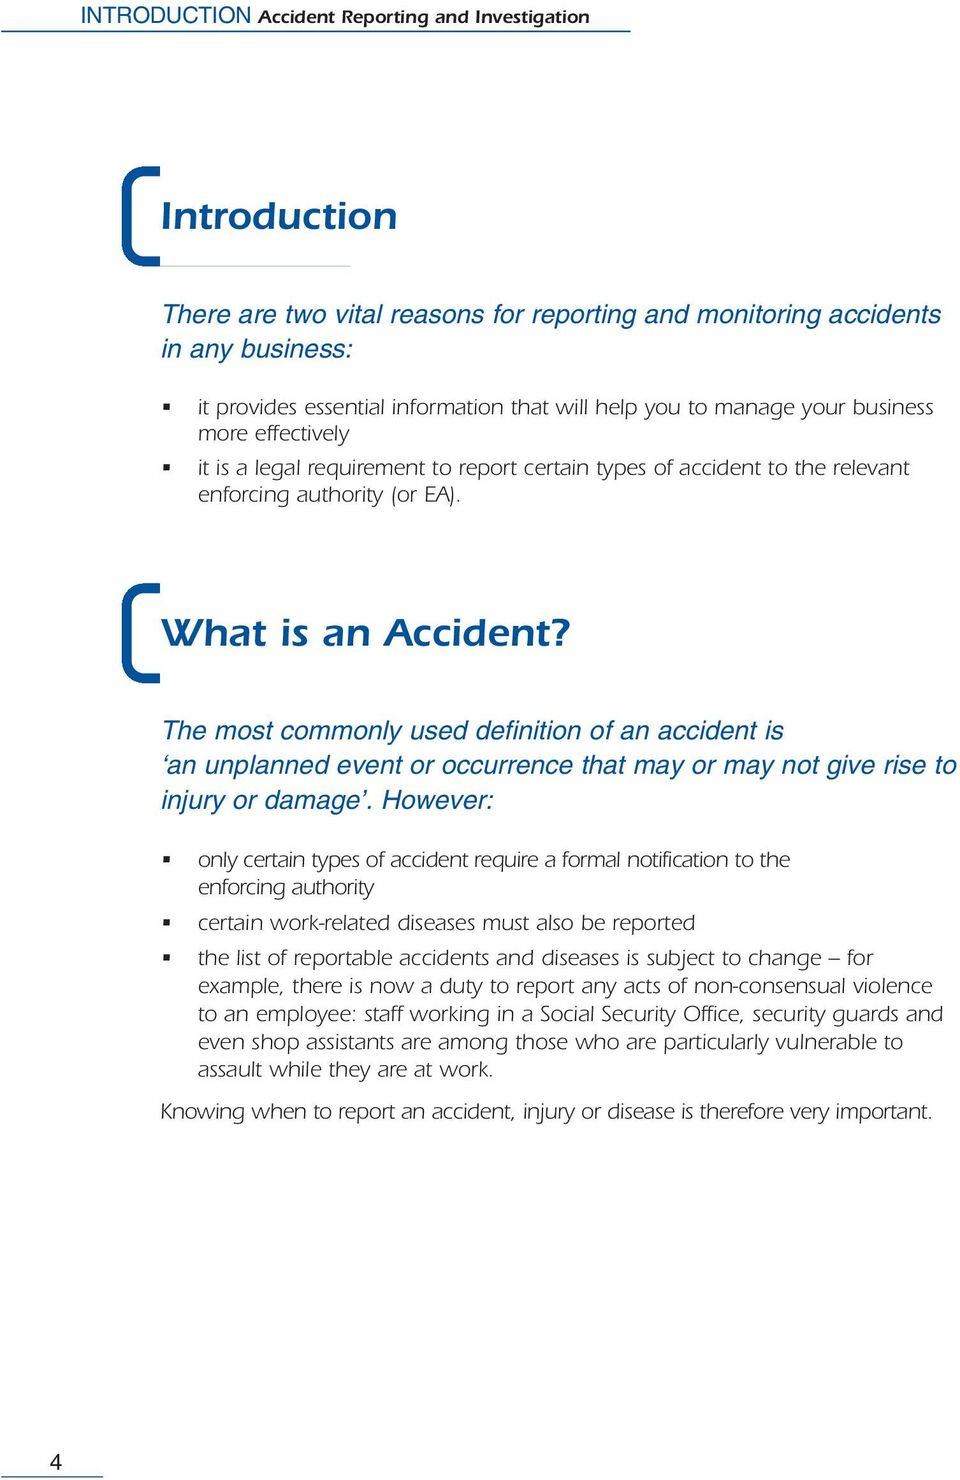 The most commonly used definition of an accident is an unplanned event or occurrence that may or may not give rise to injury or damage.